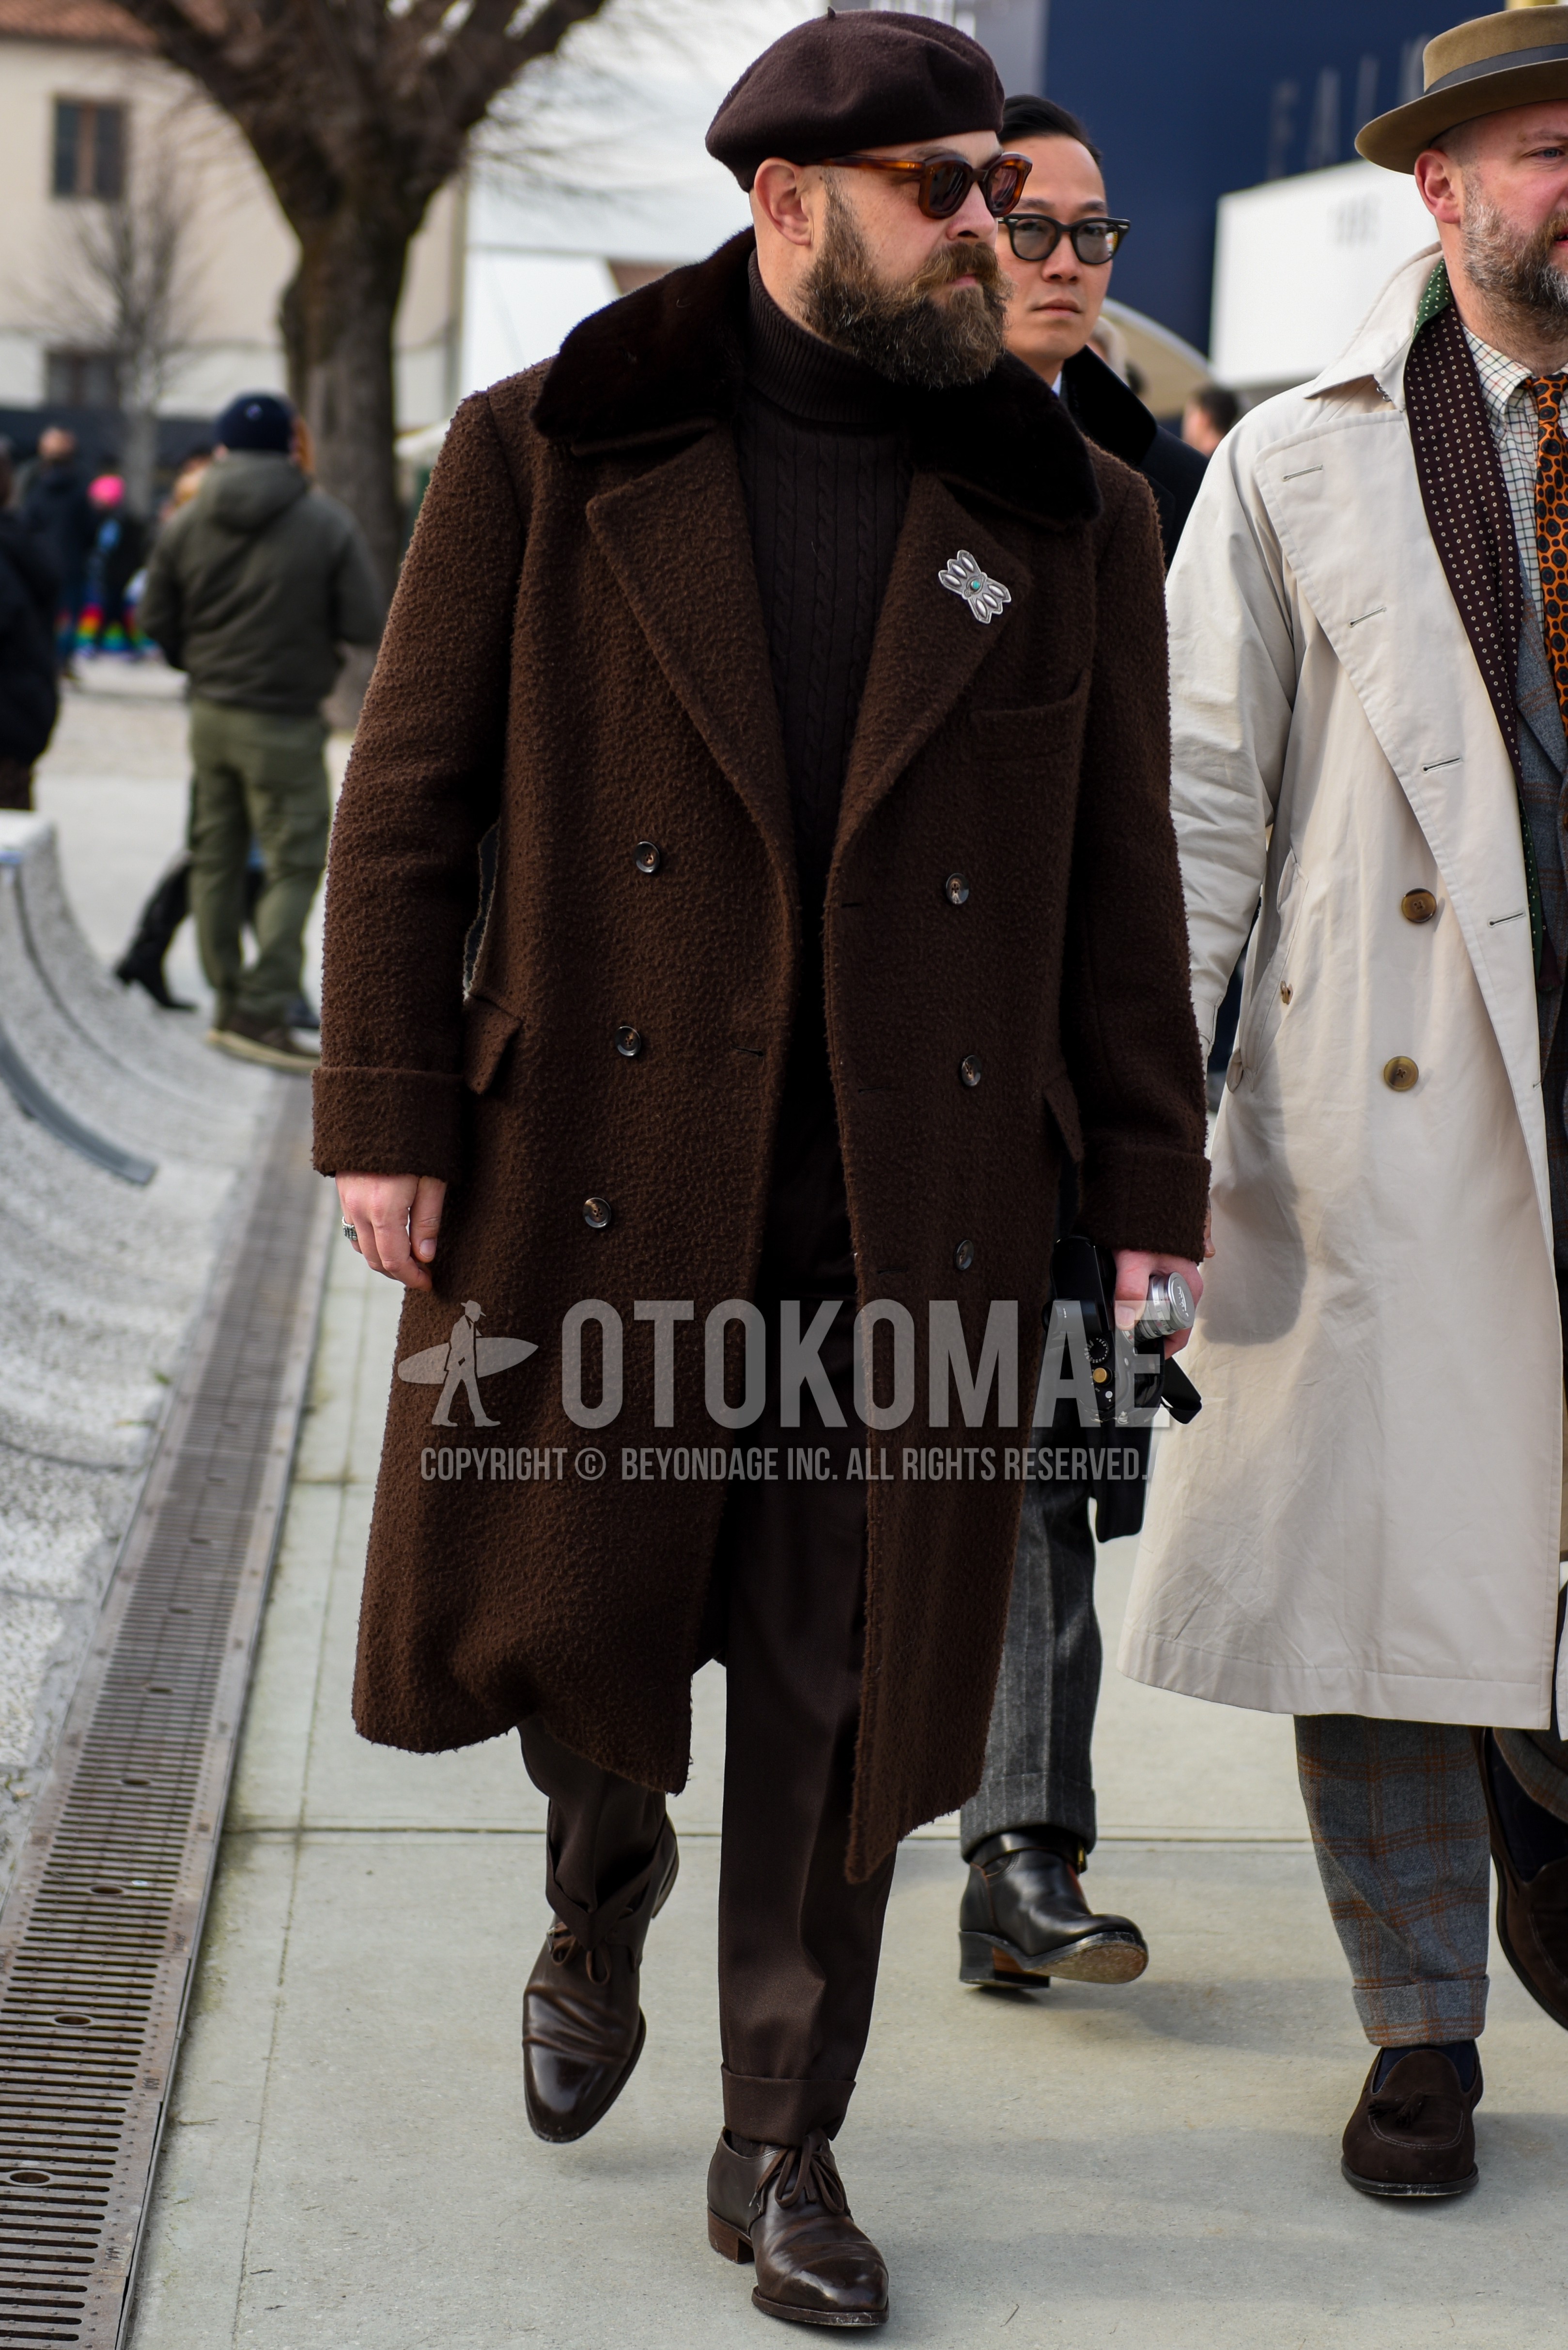 Men's autumn winter outfit with brown plain cap, brown tortoiseshell sunglasses, brown plain ulster coat, brown plain turtleneck knit, brown plain slacks, brown plain socks, brown straight-tip shoes leather shoes.